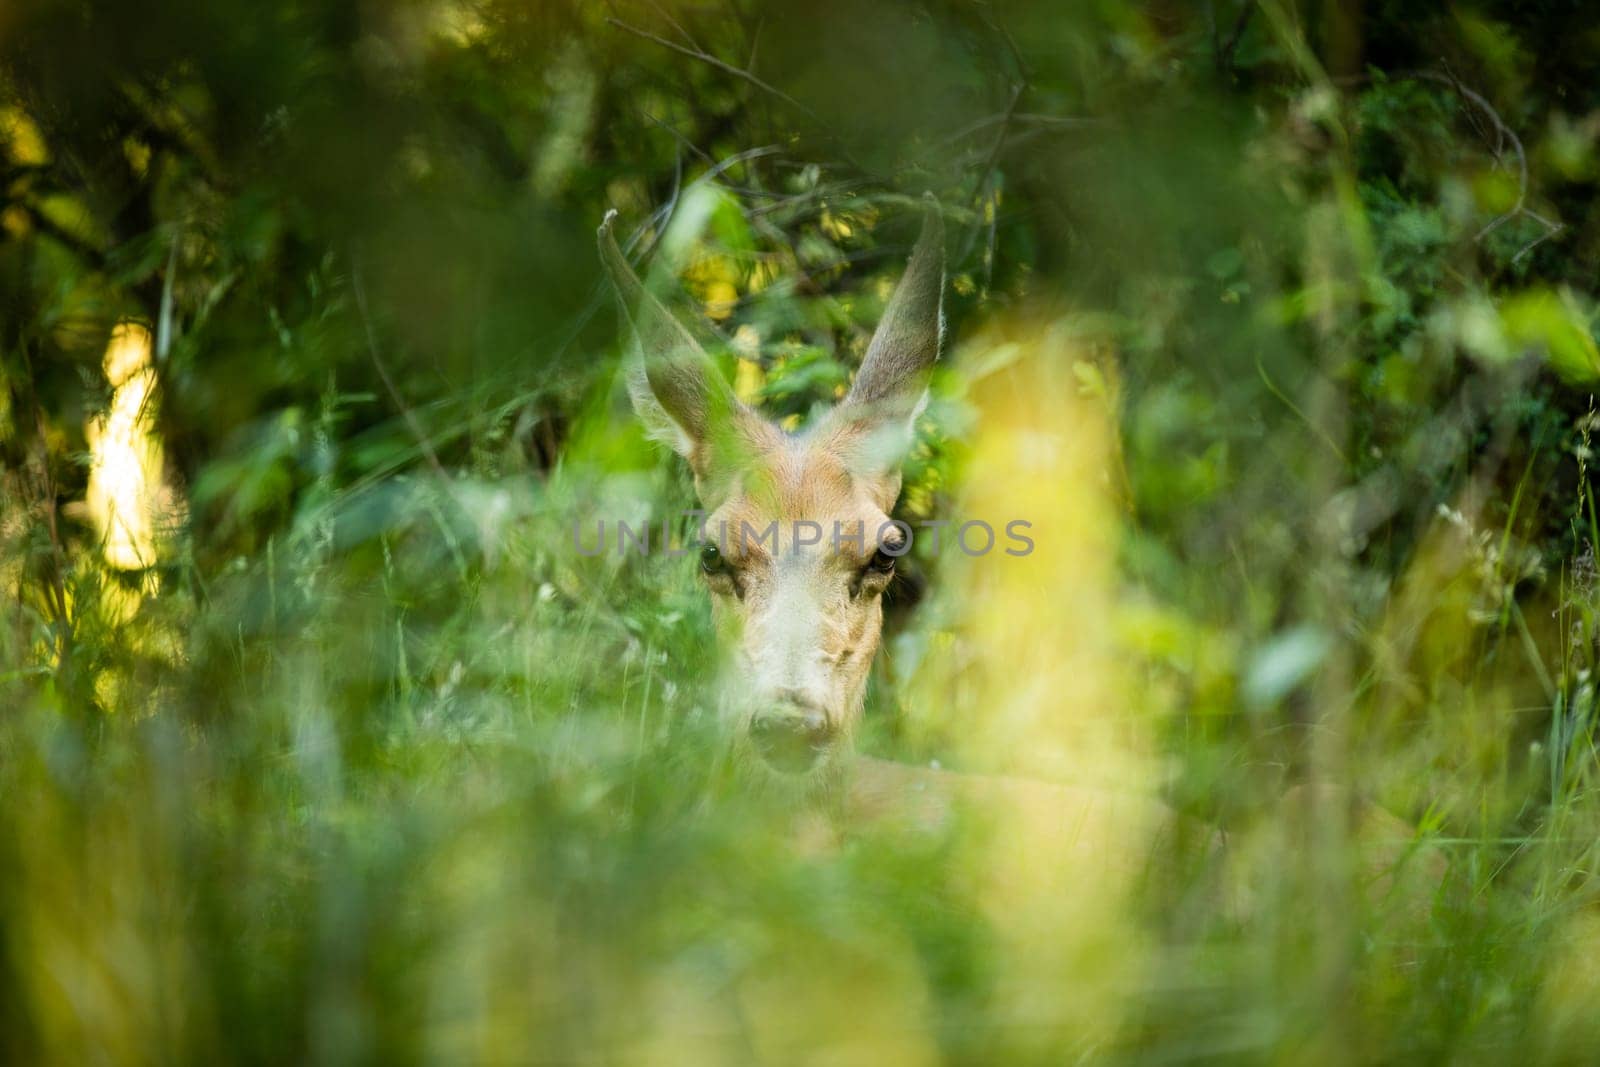 doe mule deer trying to hide within the grass from hunters